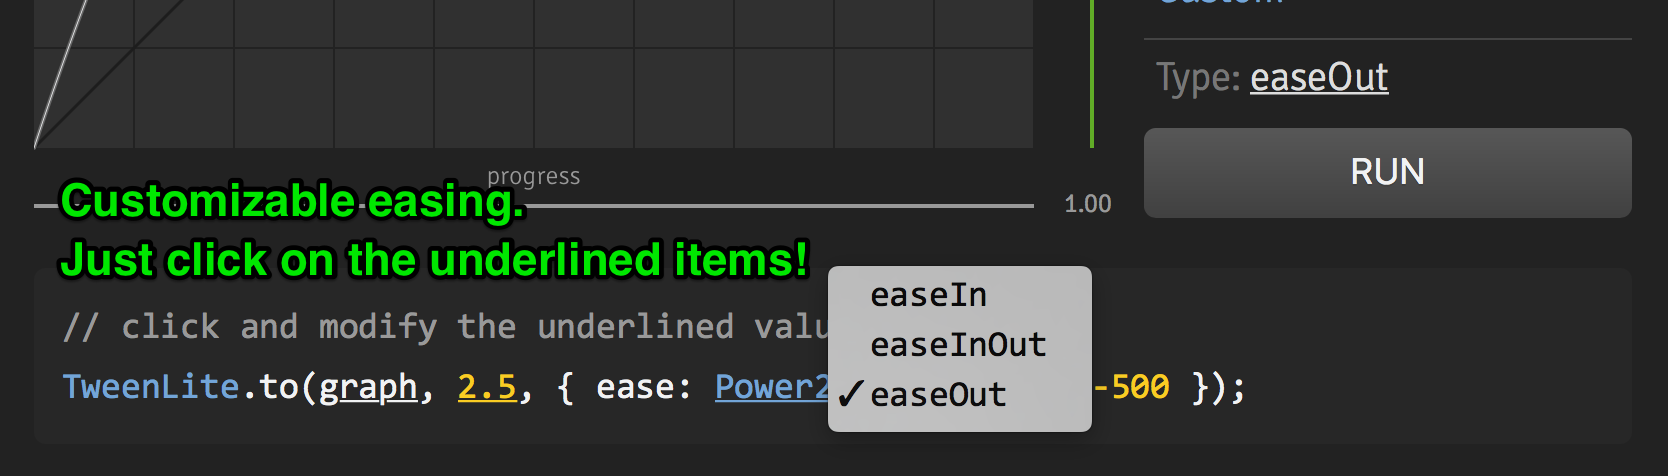 Each easing variable can be further customized by clicking on the underlined items